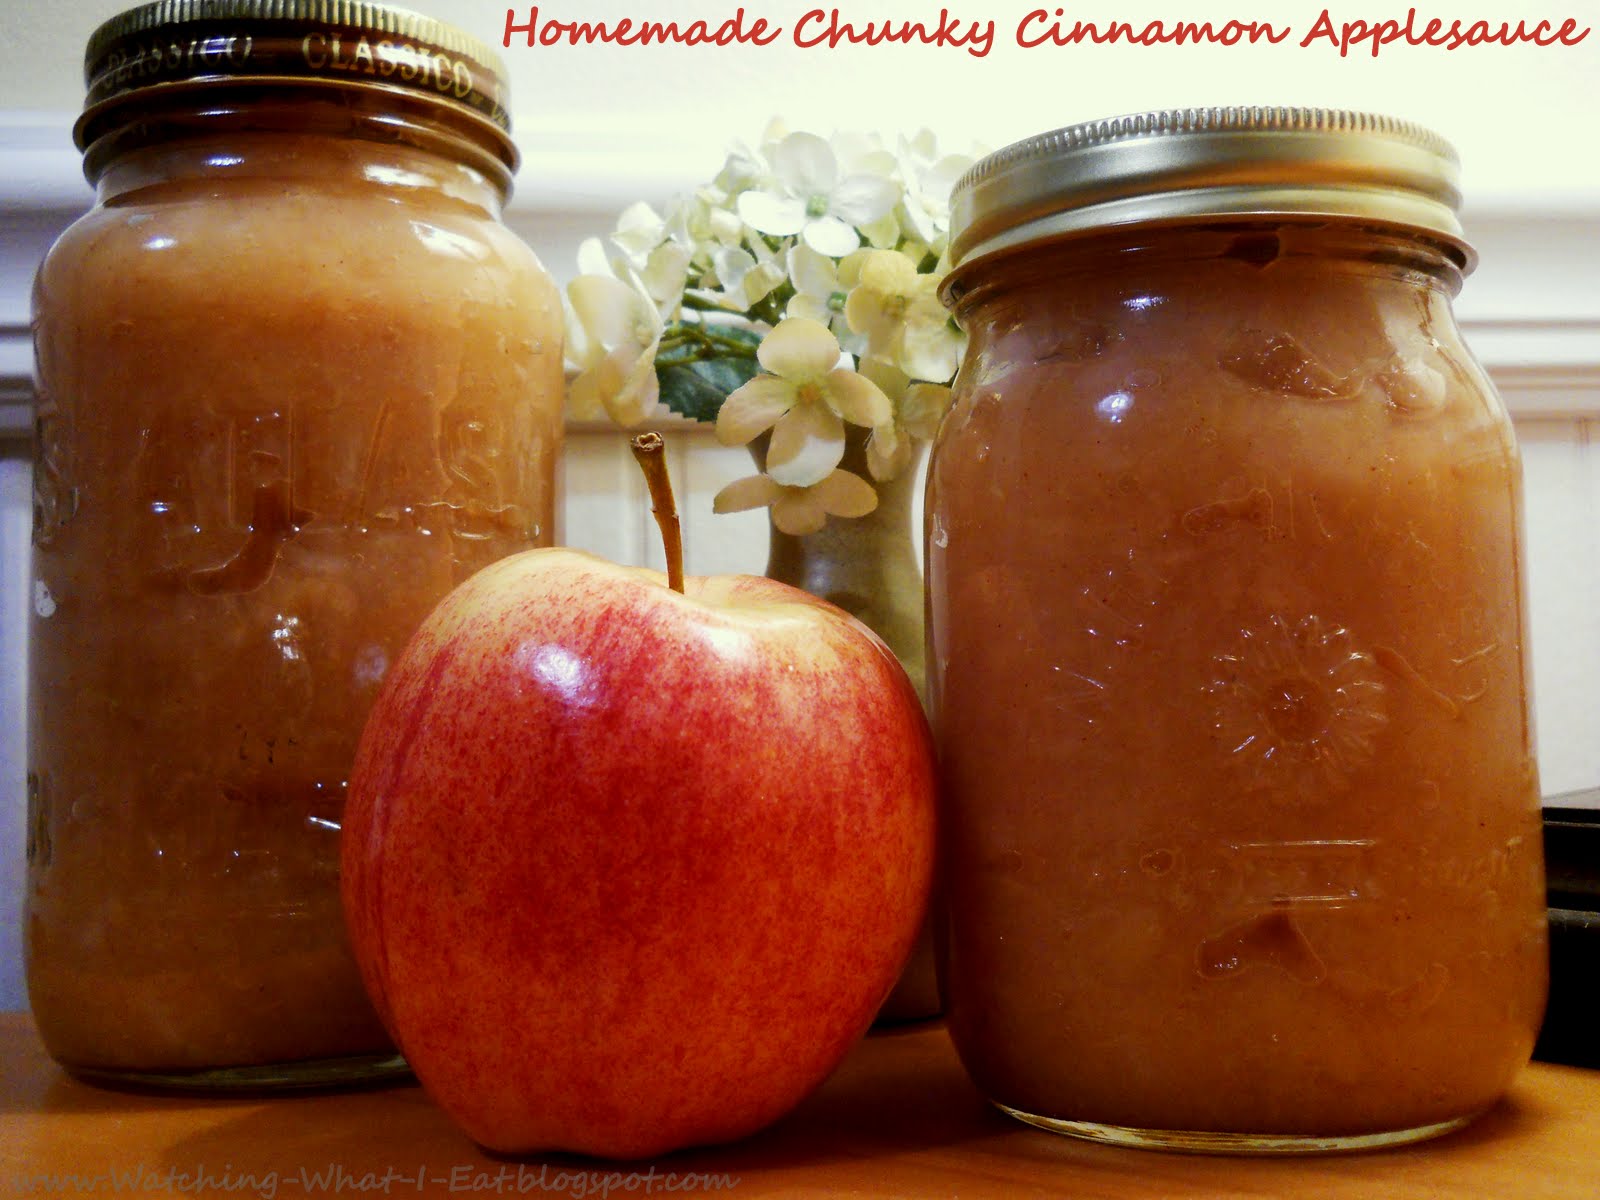 Chunky applesauce recipes with fresh apples